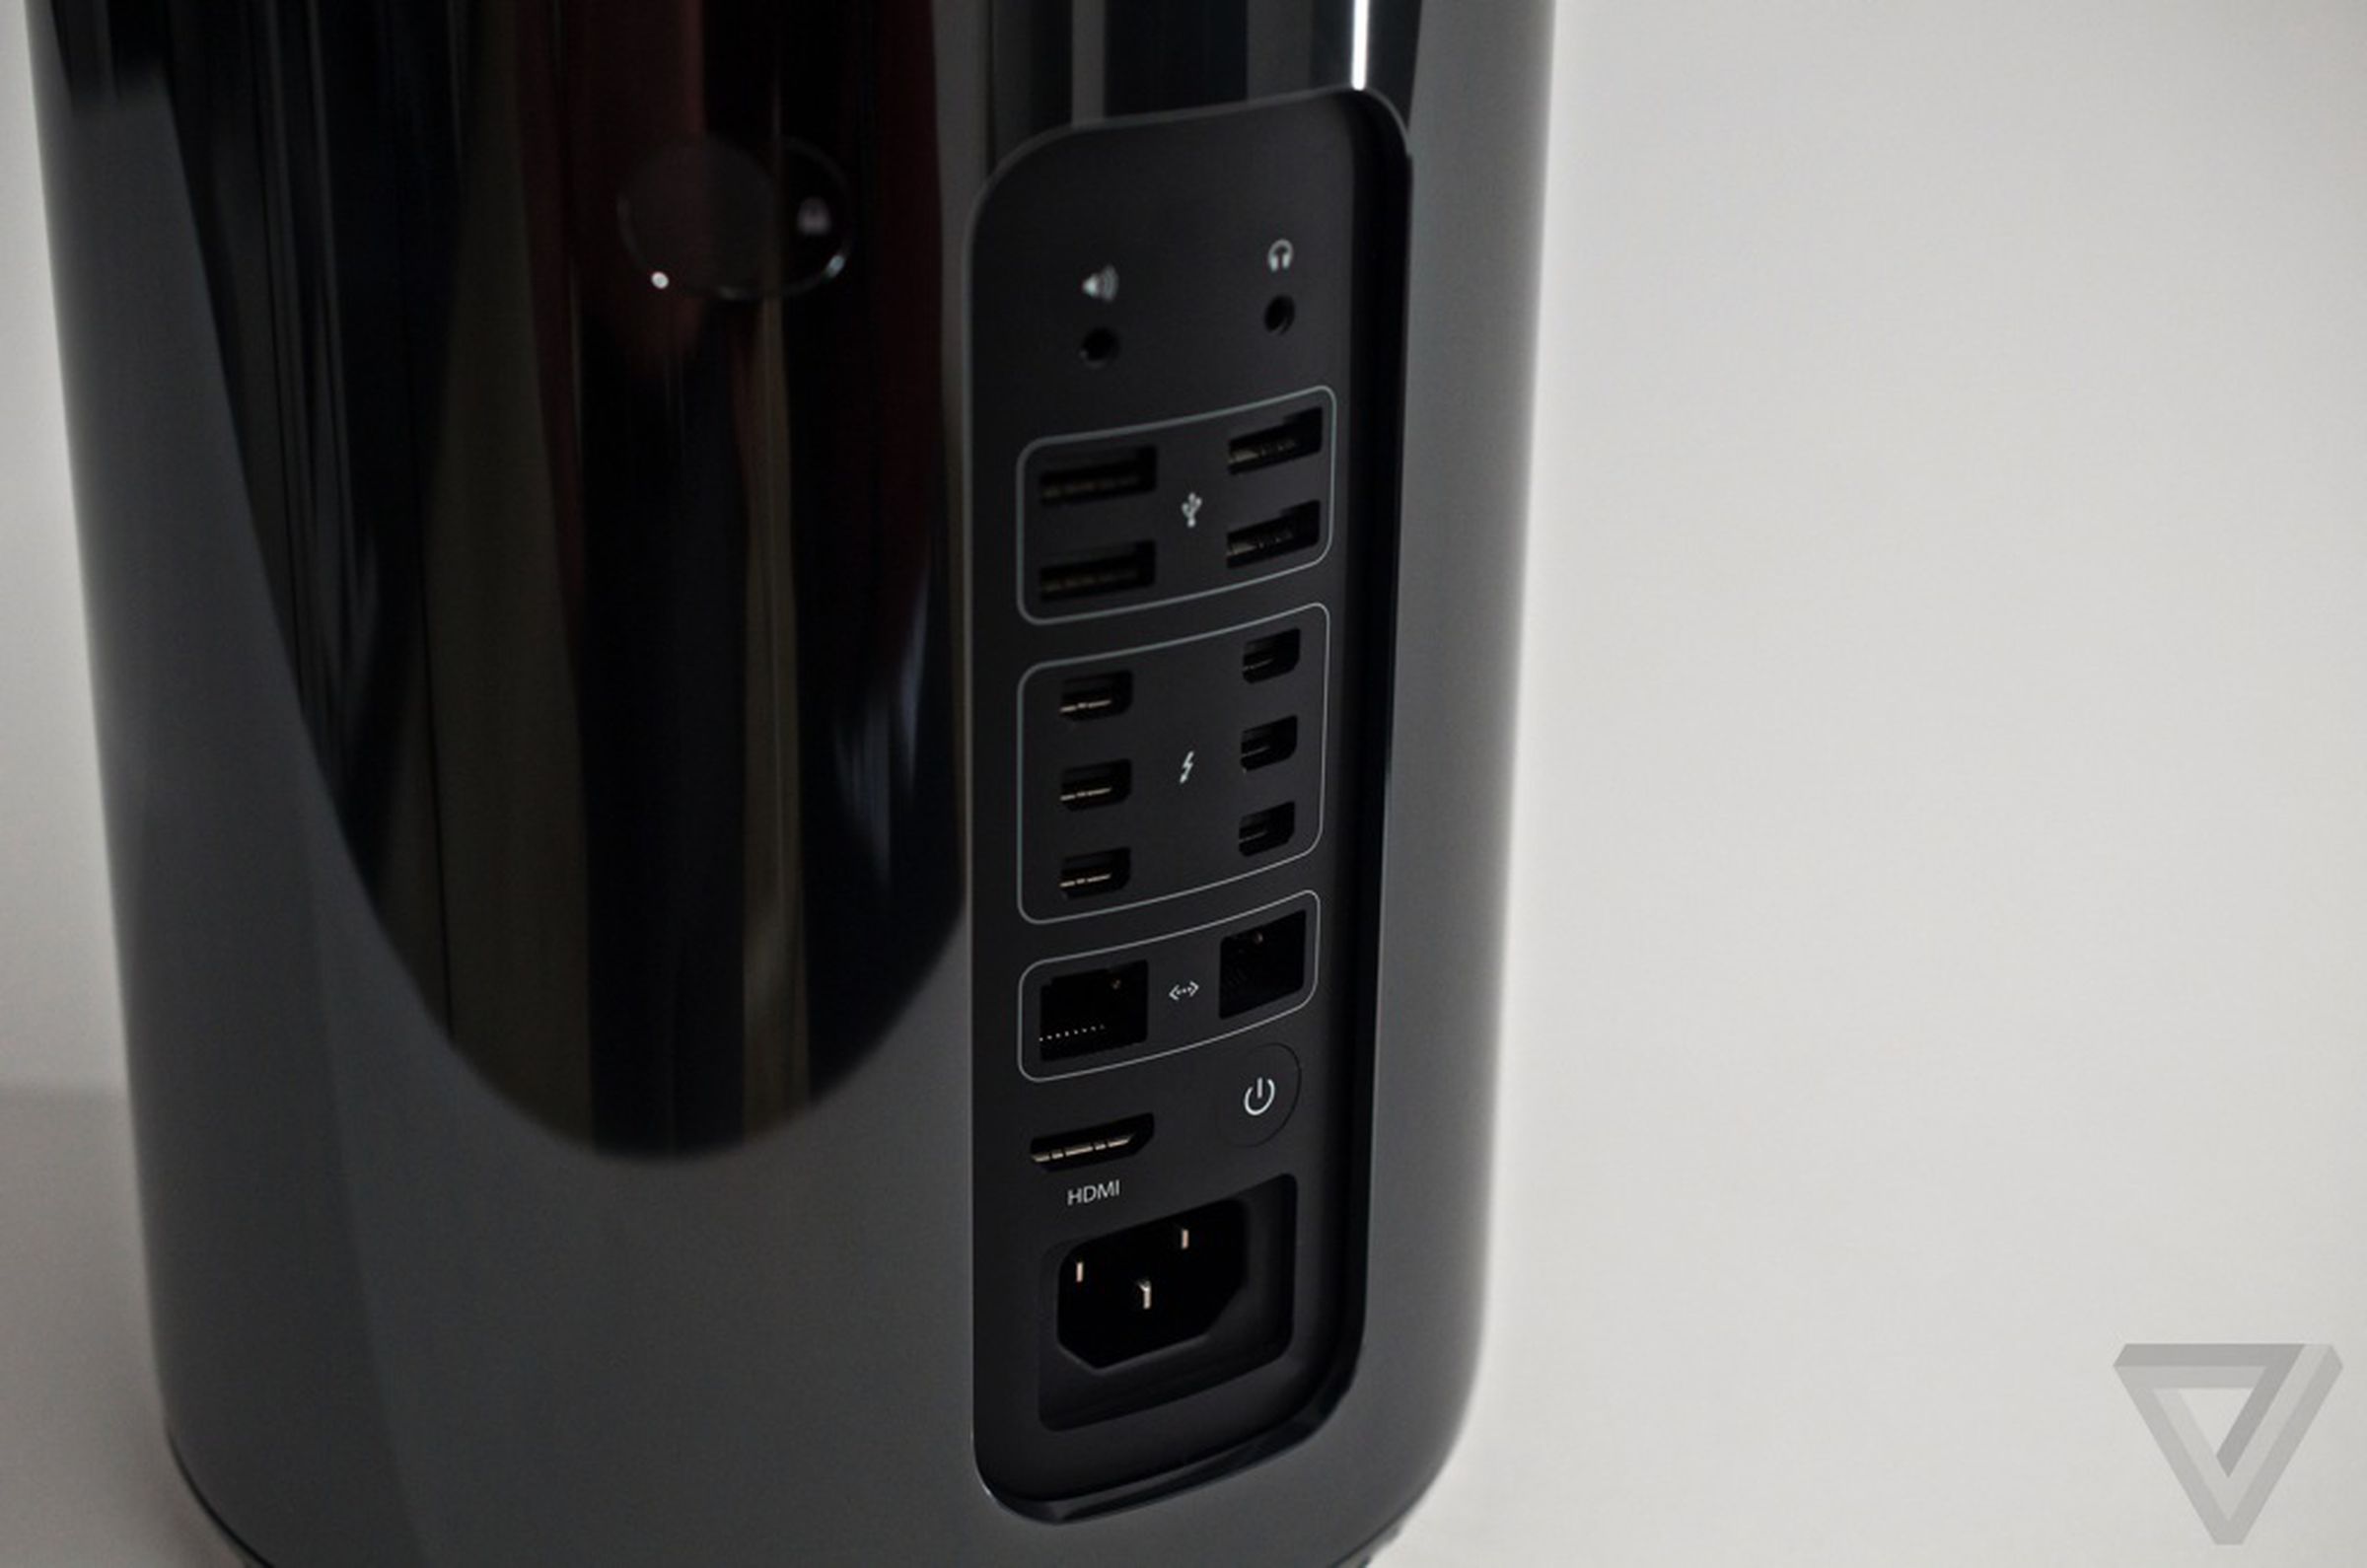 Mac Pro pictures